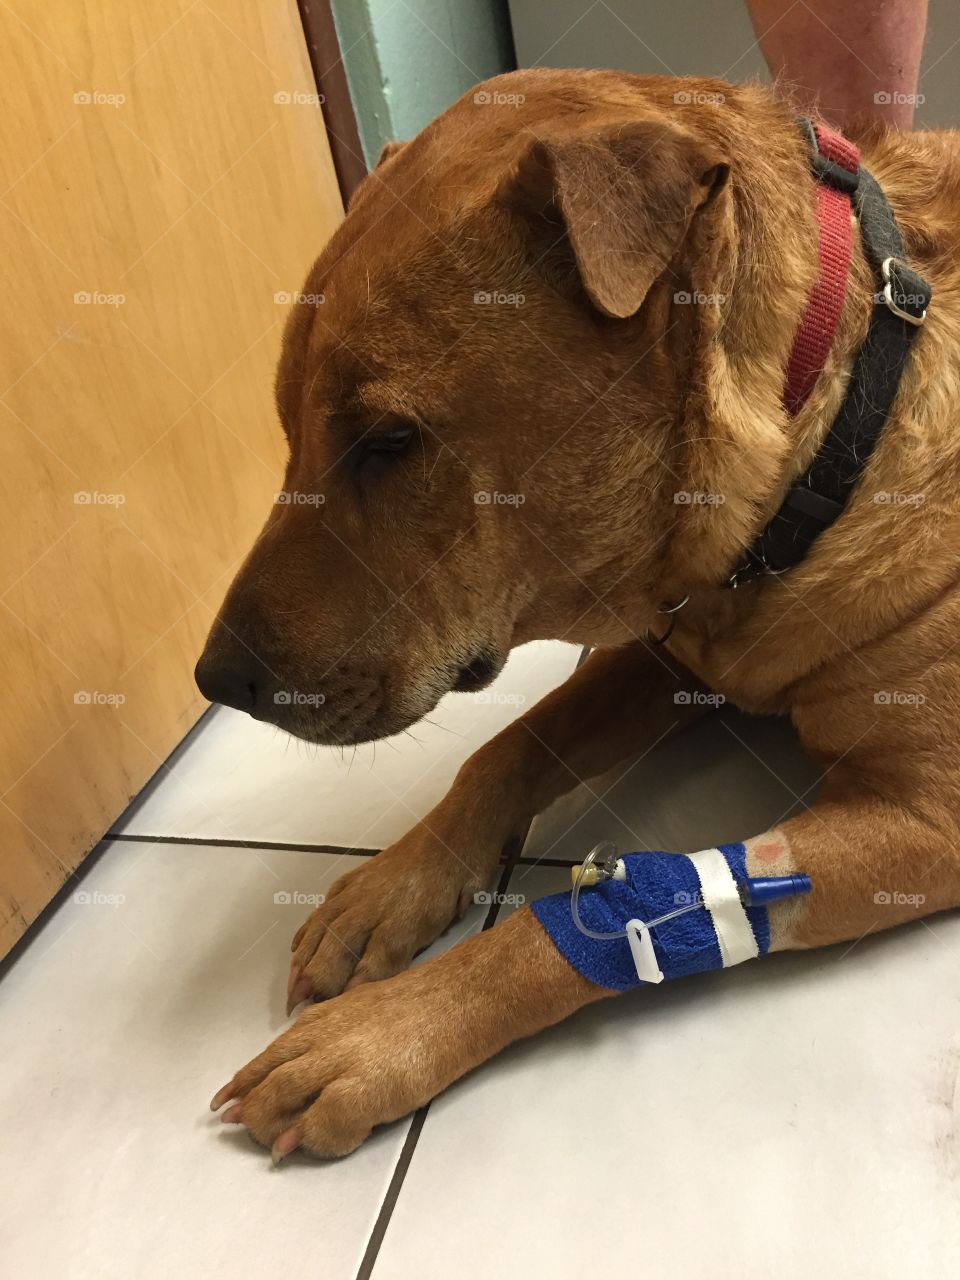 Dog at the vet with IV on front leg